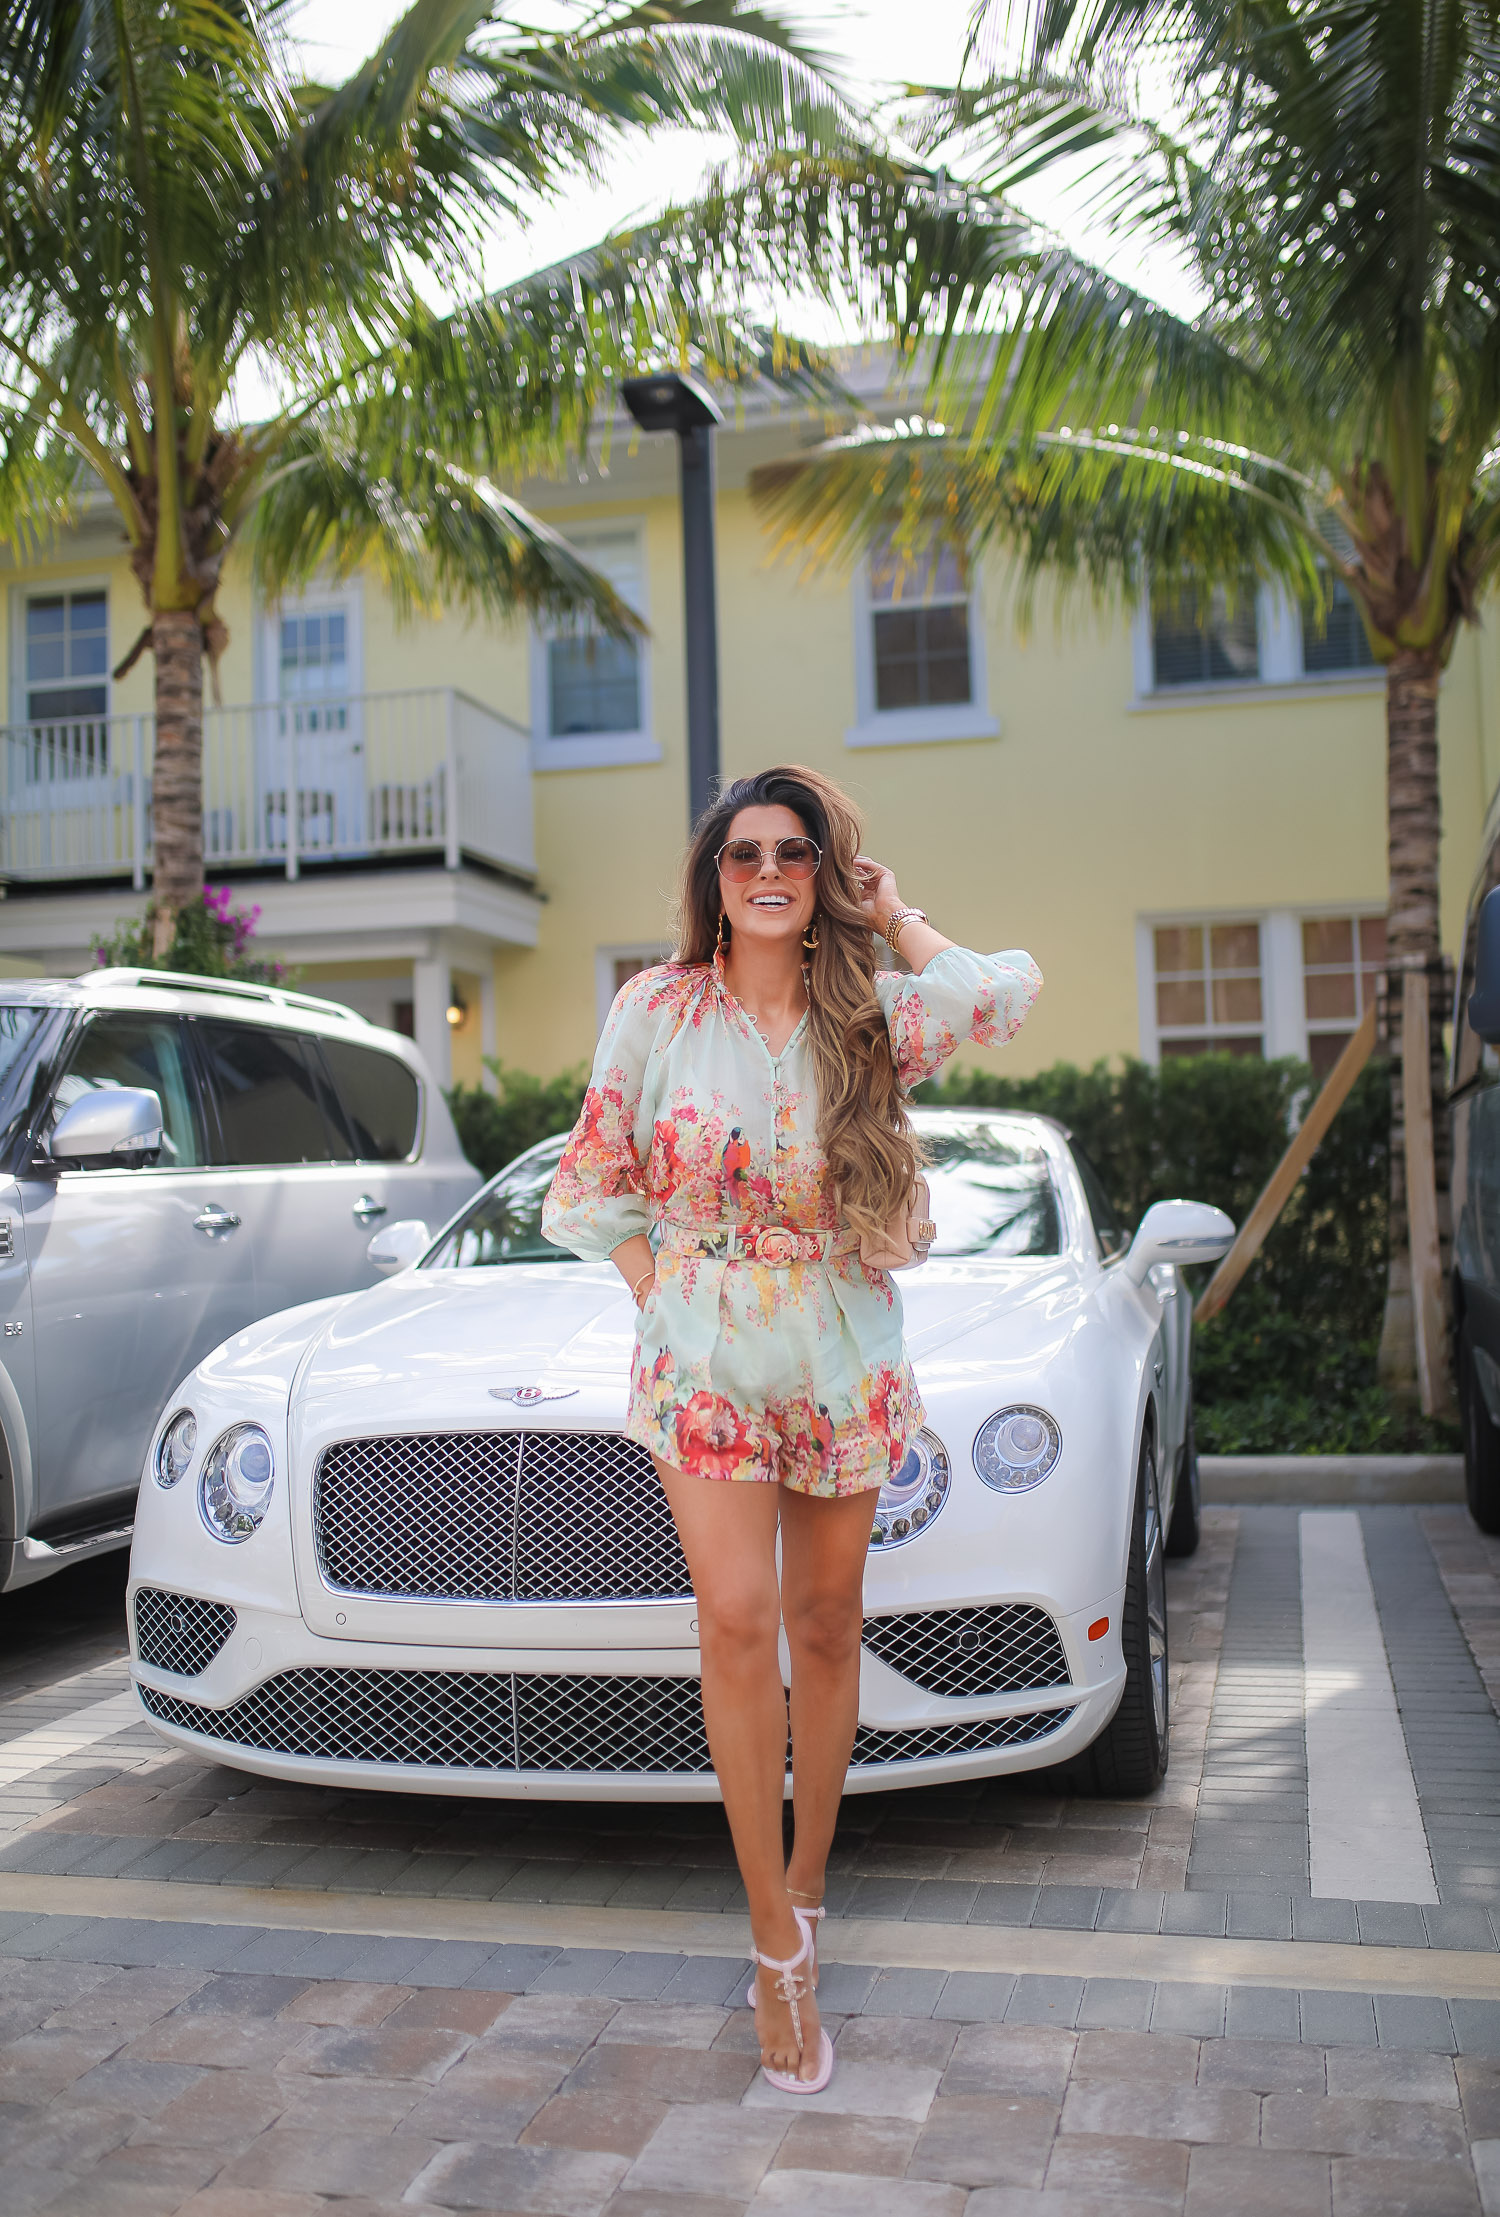 Palm beach where to stay, White elephant palm beach, Zimmerman Mae Floral Shorts and Blouse, Tiktok viral jewelry anklet, Amazon Tiktok Viral anklet, Chanel Large Button Paris Gold earrings, high end fashion blog, Emily gemma, the sweetest thing blog, luxury travel blog, palm beach white elephant | Zimmermann Outfit by popular US fashion blog, The Sweetest Thing: image of Emily Gemma standing by a white Bentley and wearing a Zimmerman Mae Floral Shorts and Blouse, Tiktok viral jewelry anklet, Amazon Tiktok Viral anklet, Chanel Large Button Paris Gold earrings, Cartier bracelets, gold Rolex watch, Chanel sandals and carrying a Chanel handbag.  